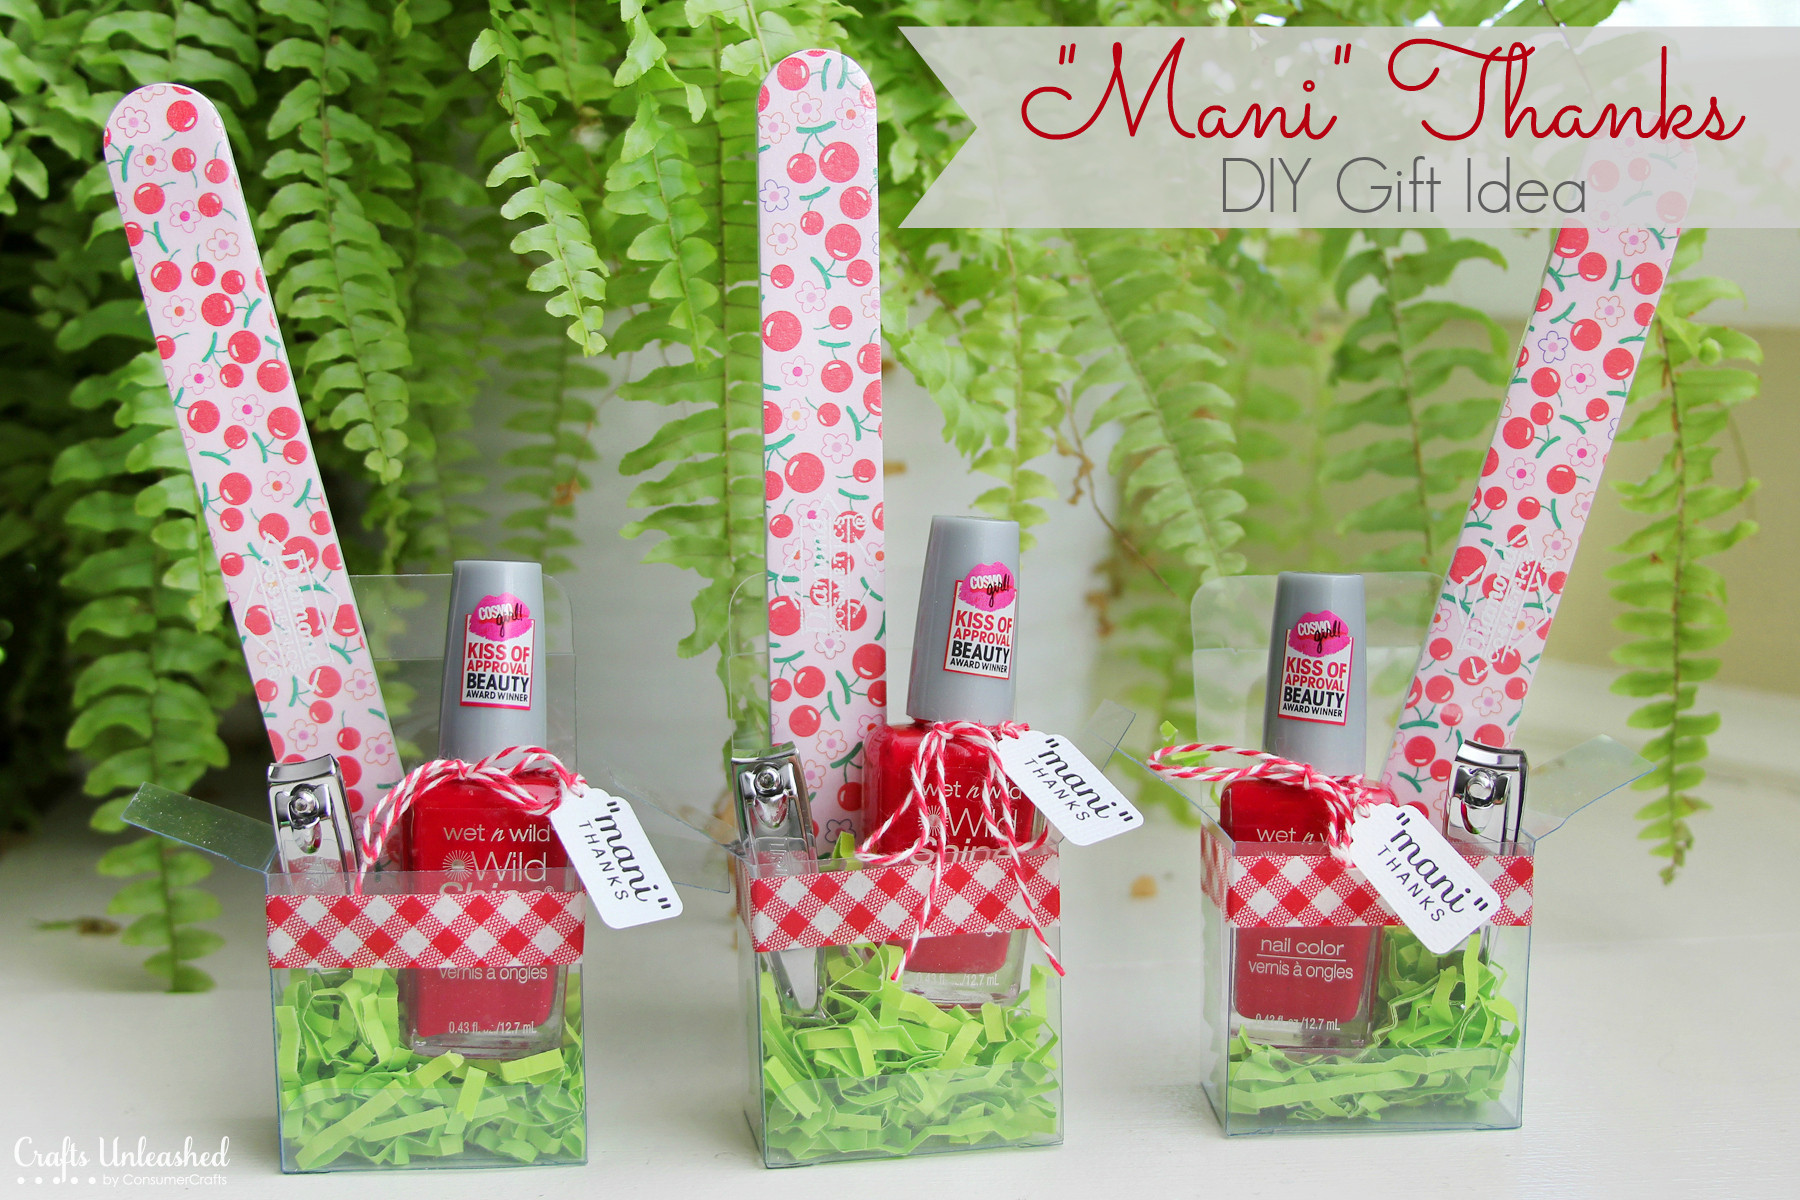 Christmas Craft Ideas For Gifts
 DIY Gift Idea for Girls "Mani Thanks" Manicure Set